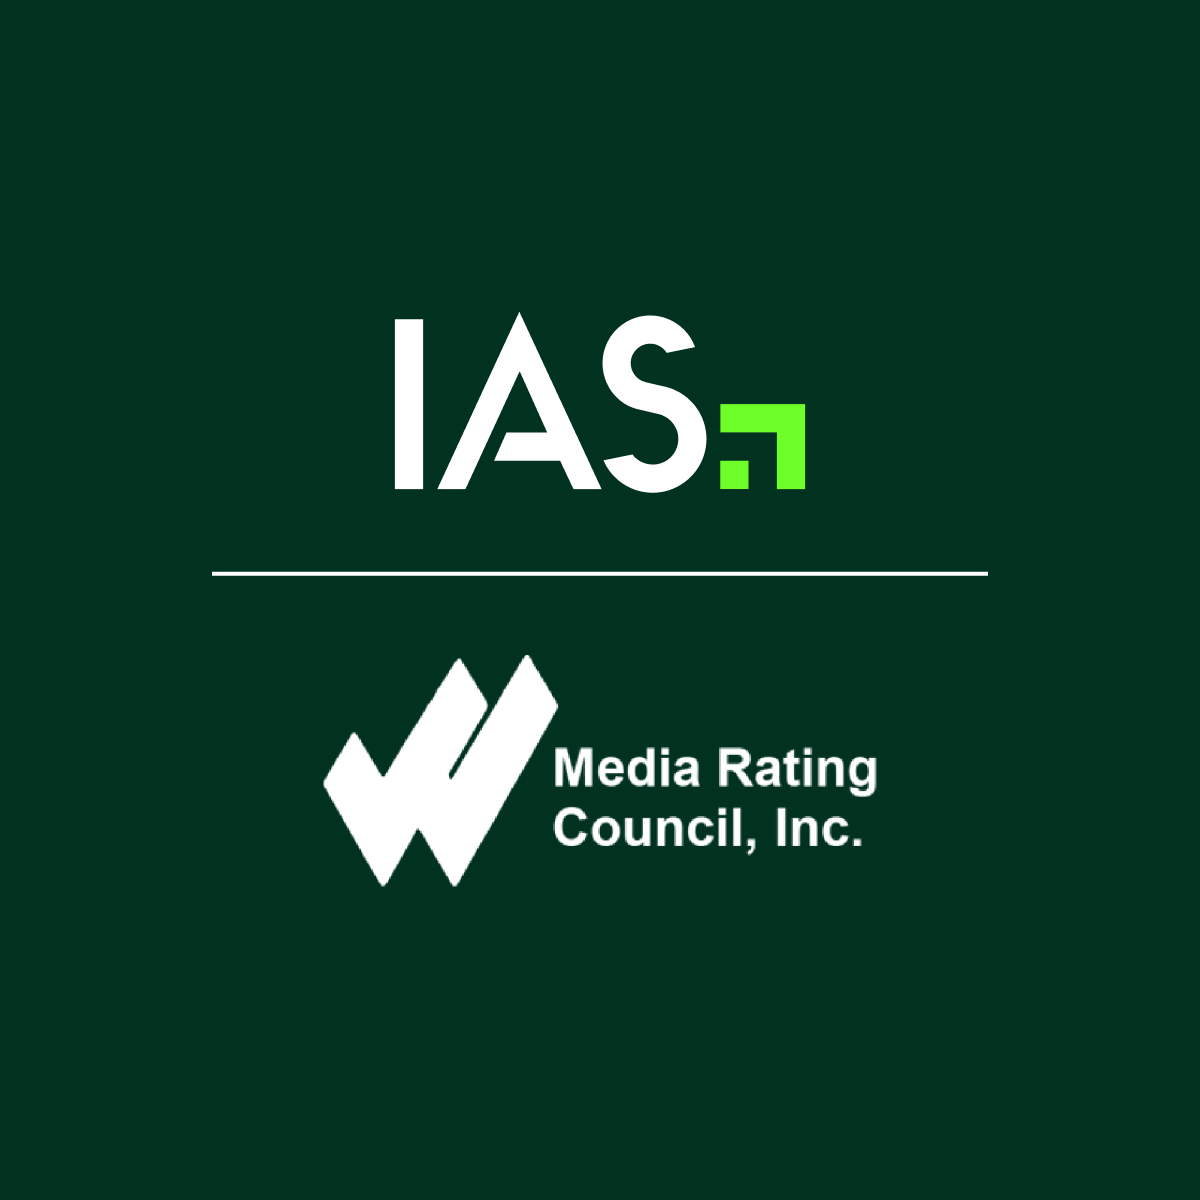 IAS Achieves MRC Accreditation for Sophisticated Invalid Traffic (SIVT) Filtration in the Connected TV Environment